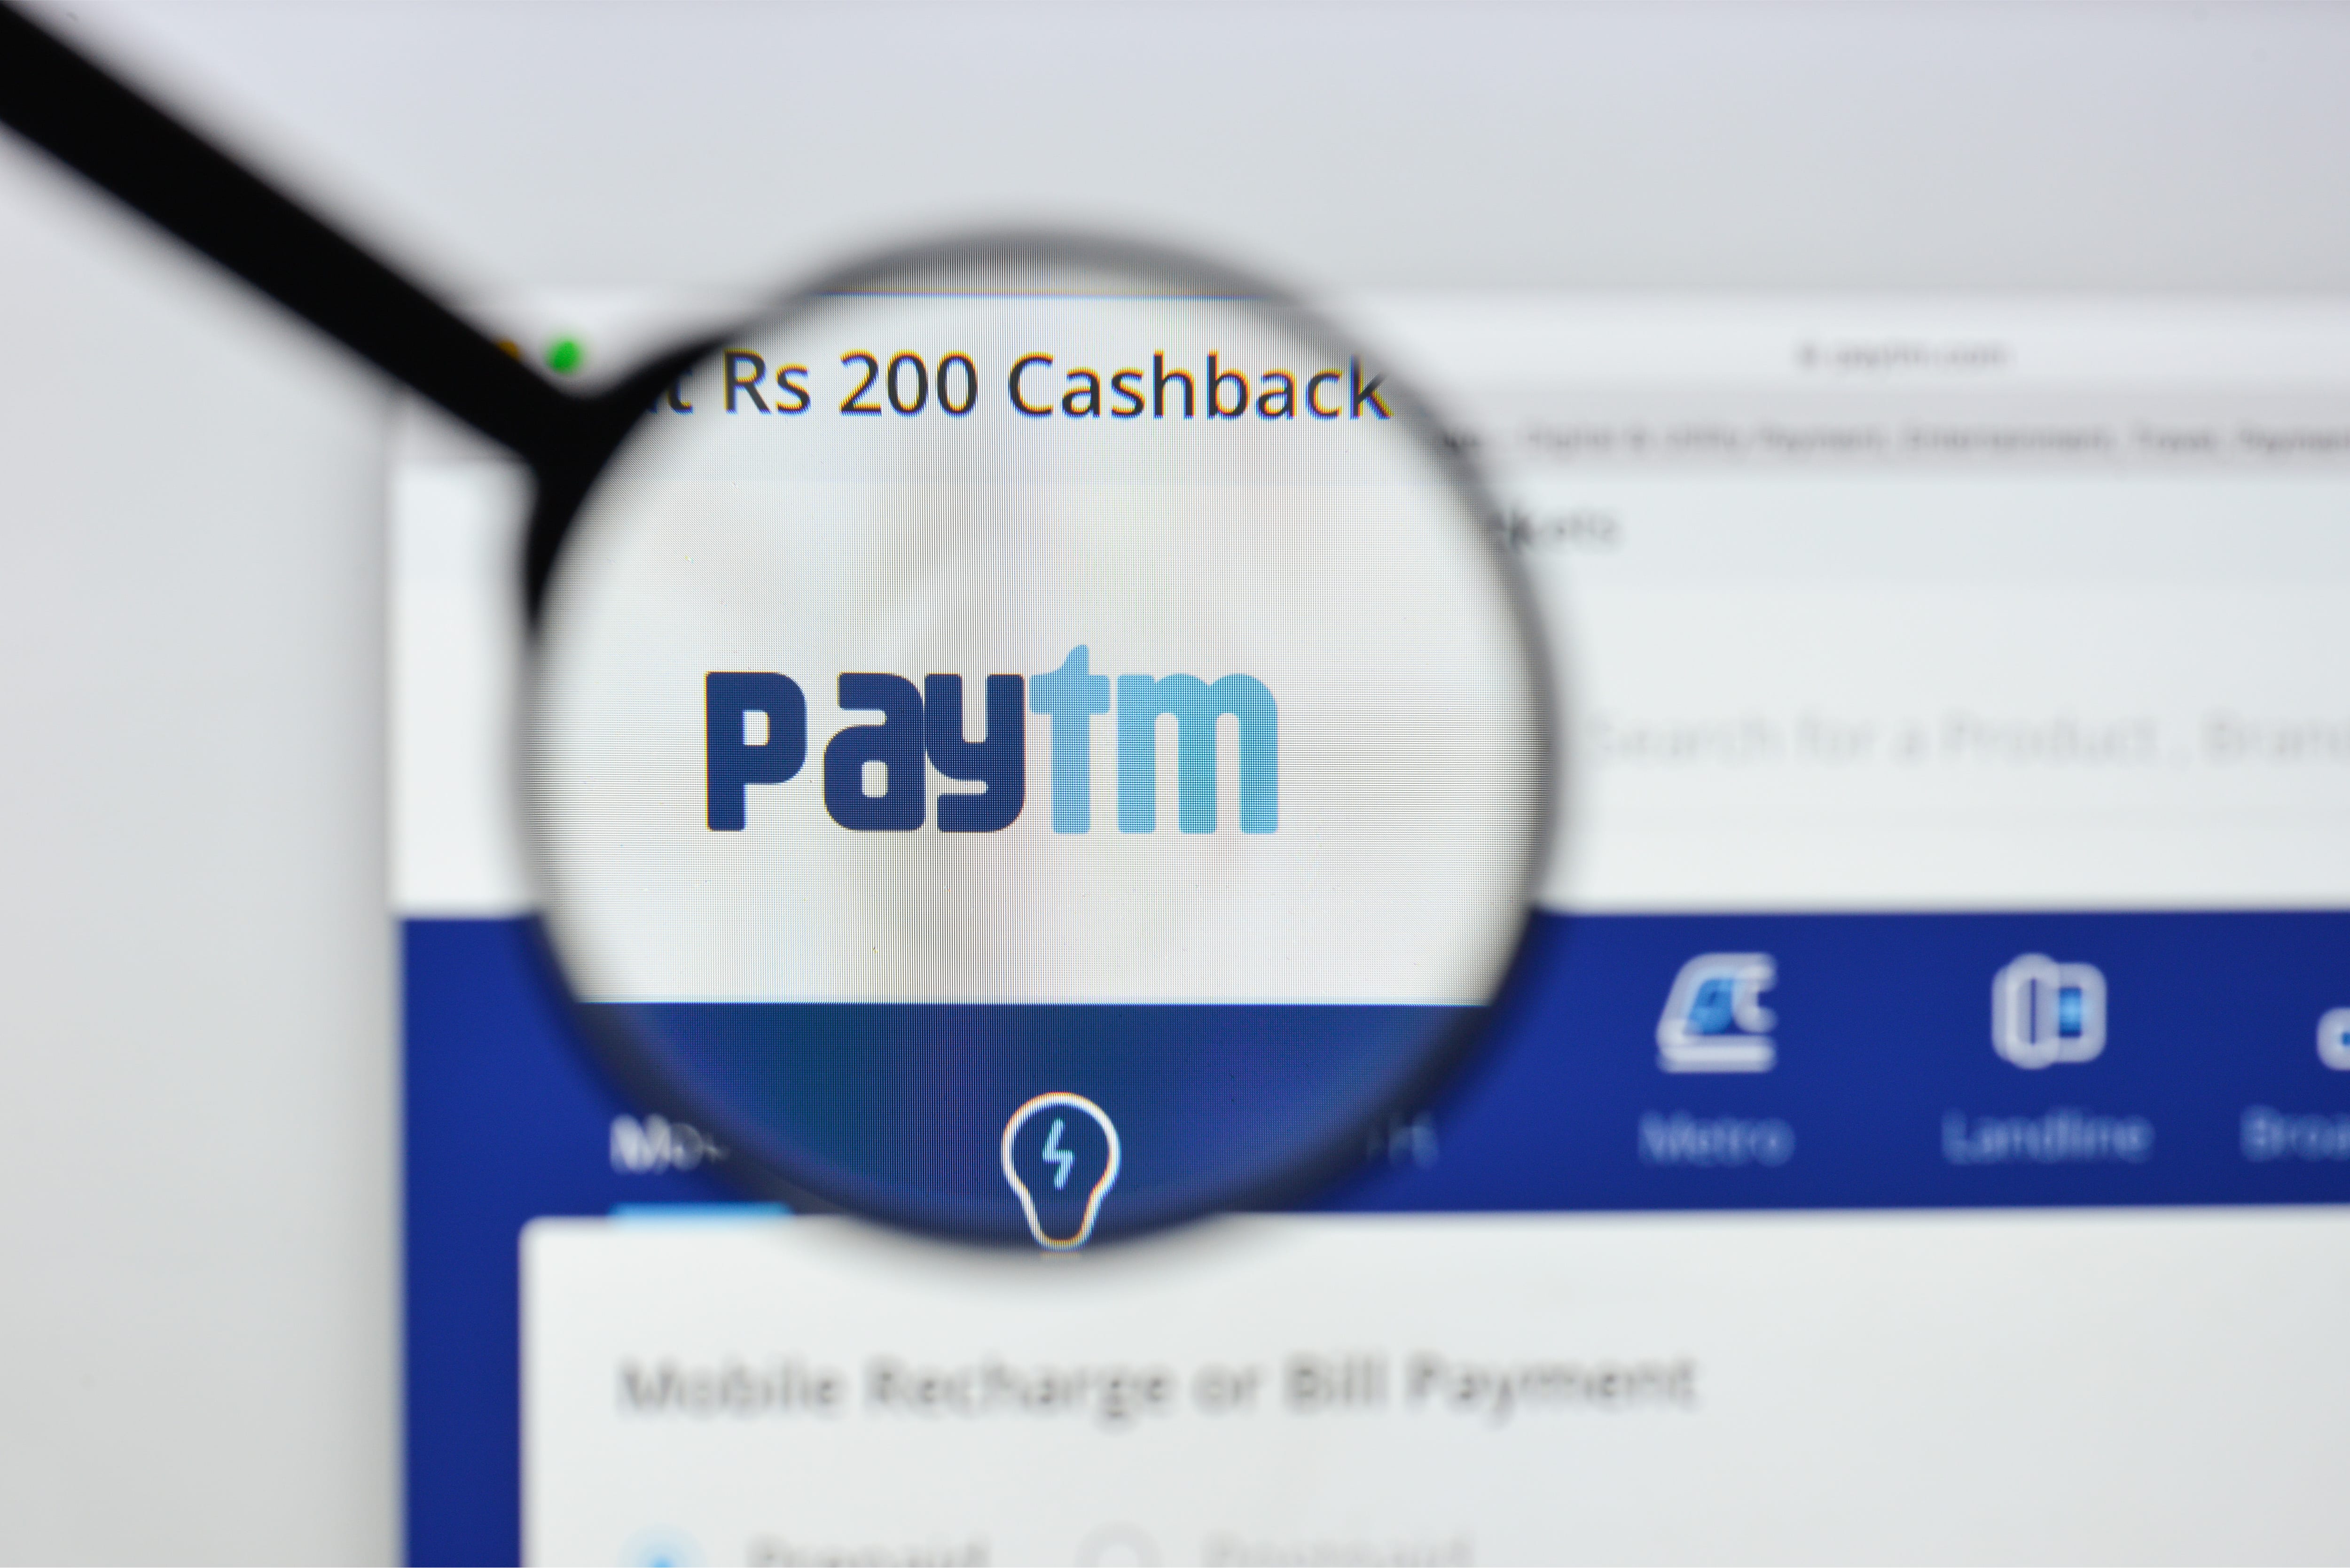 Paytm S India S Usage Plummets Google Pay Phonepe See Spike - 